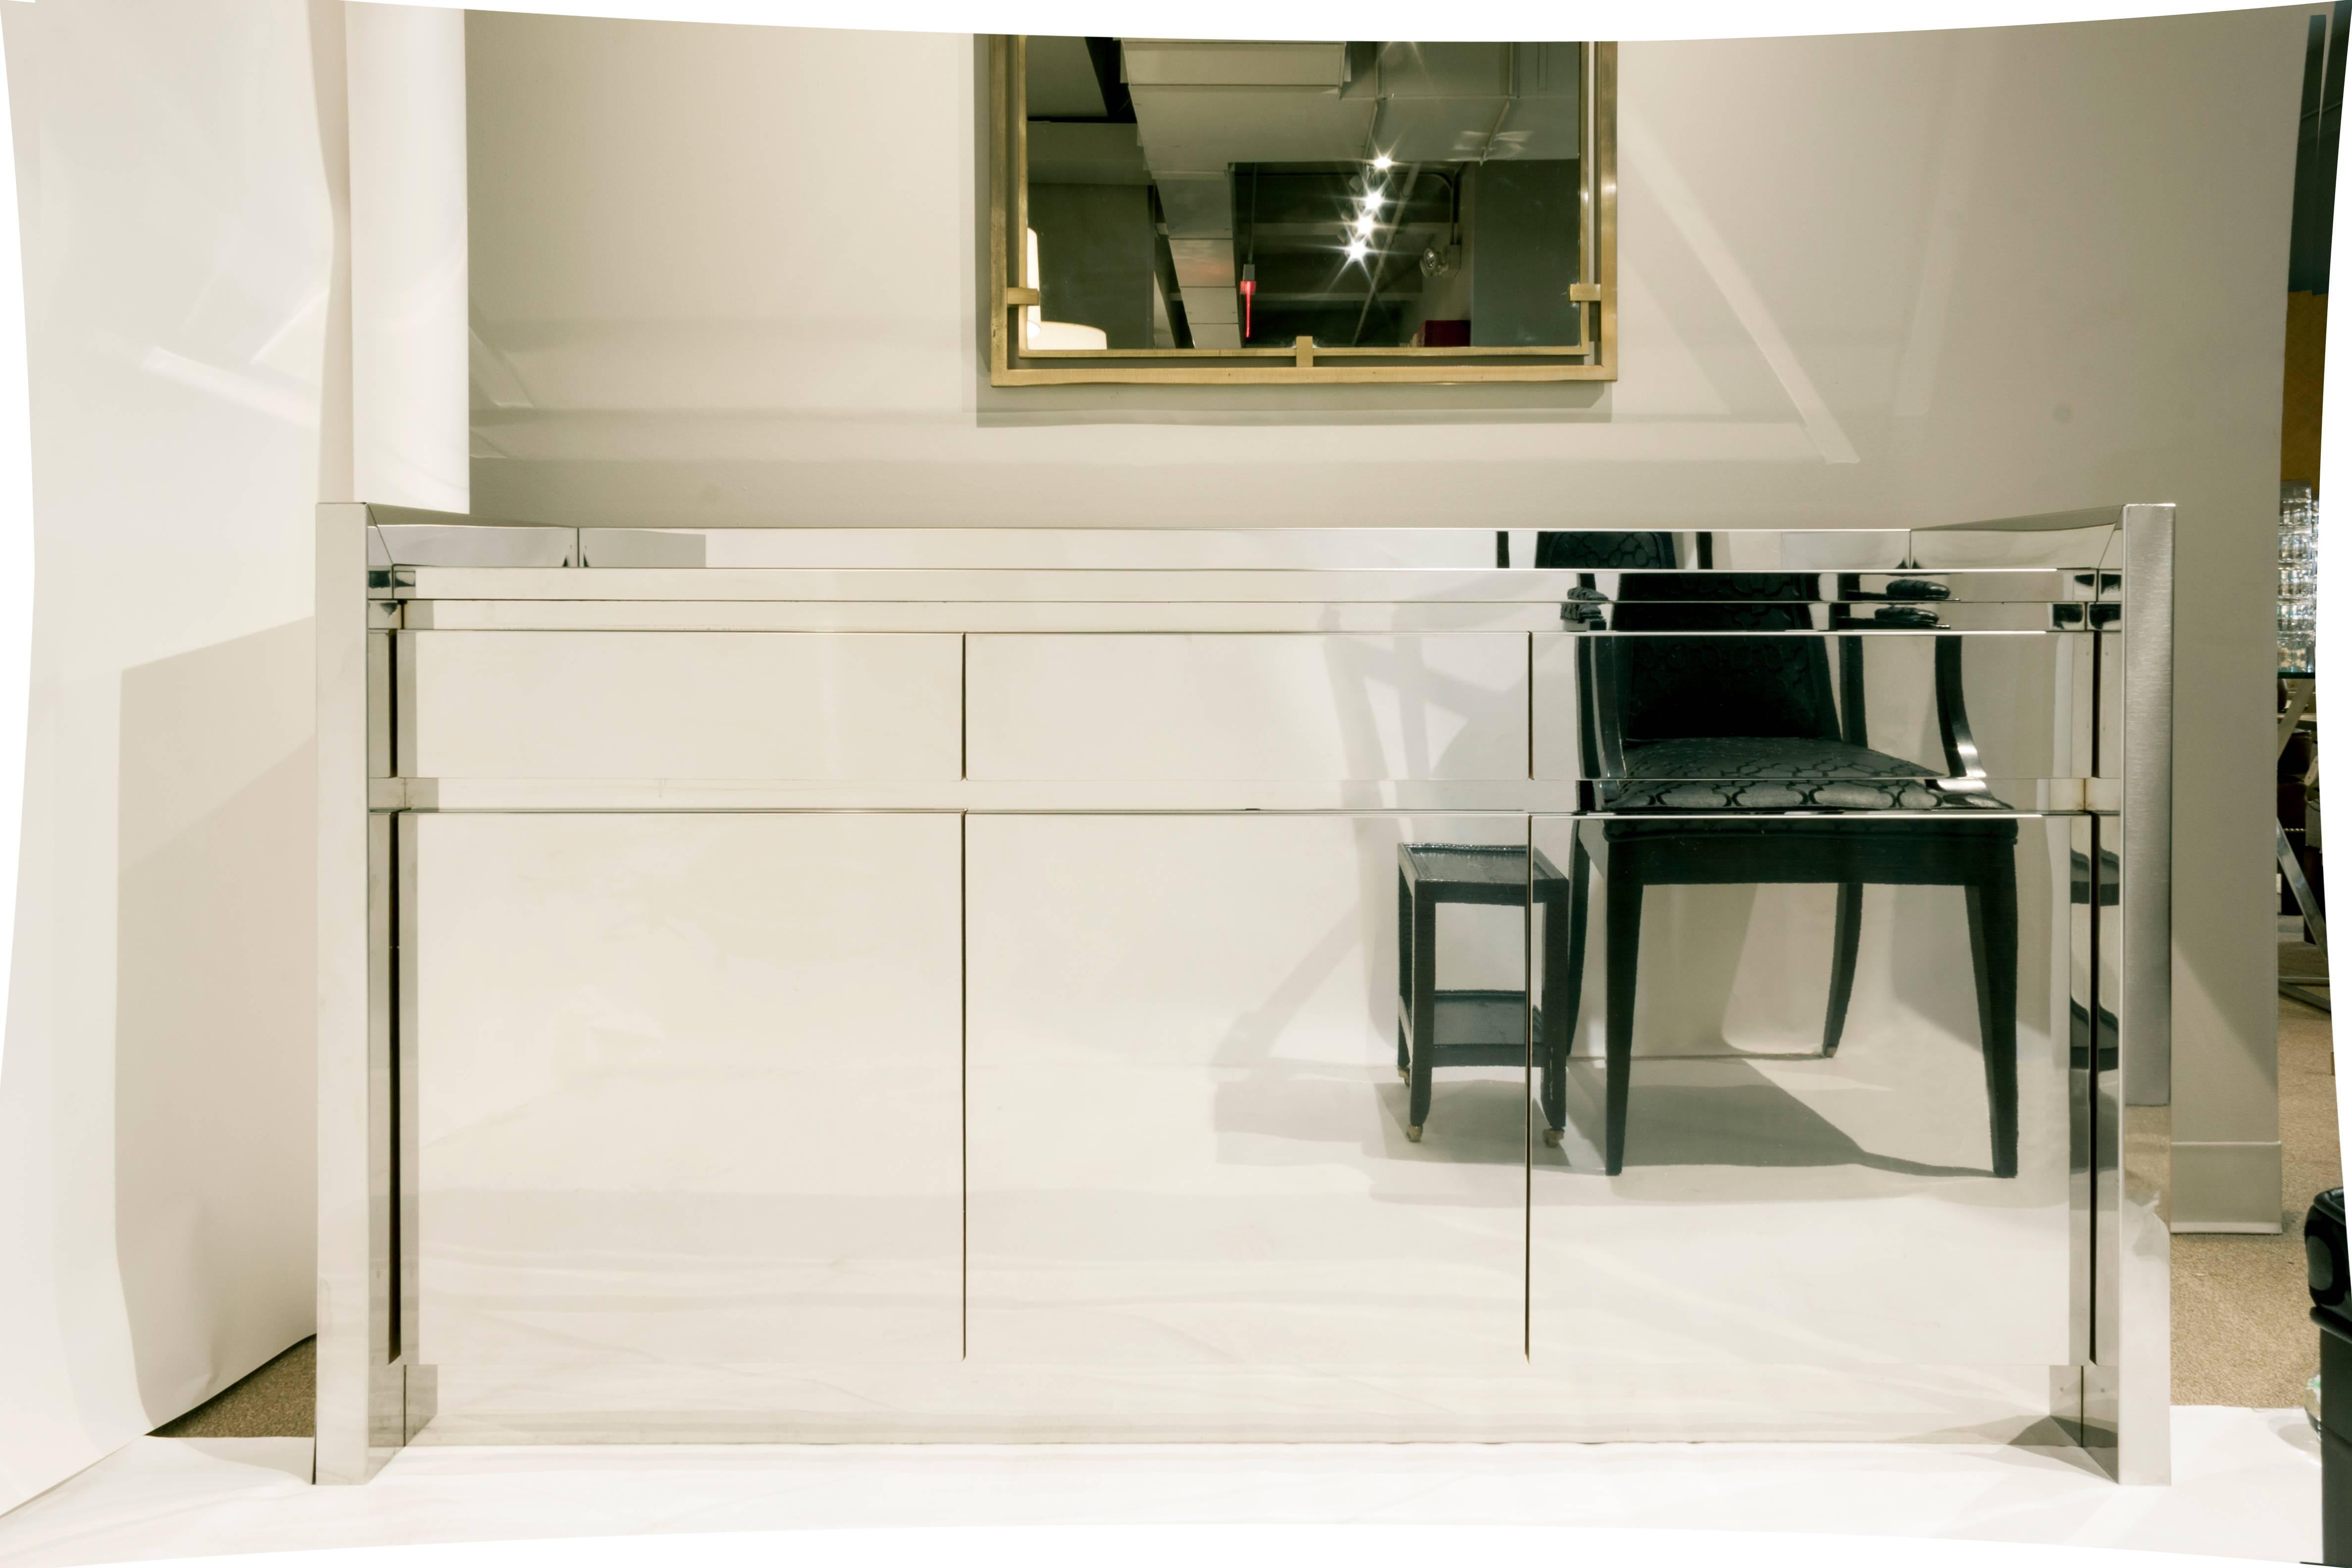 Exceptional cabinet with three doors and three drawers clad in polished stainless steel by Karl Springer, American 1980s.
Like all of Karl Springer’s pieces, it is meticulously crafted with exceptional materials.
 